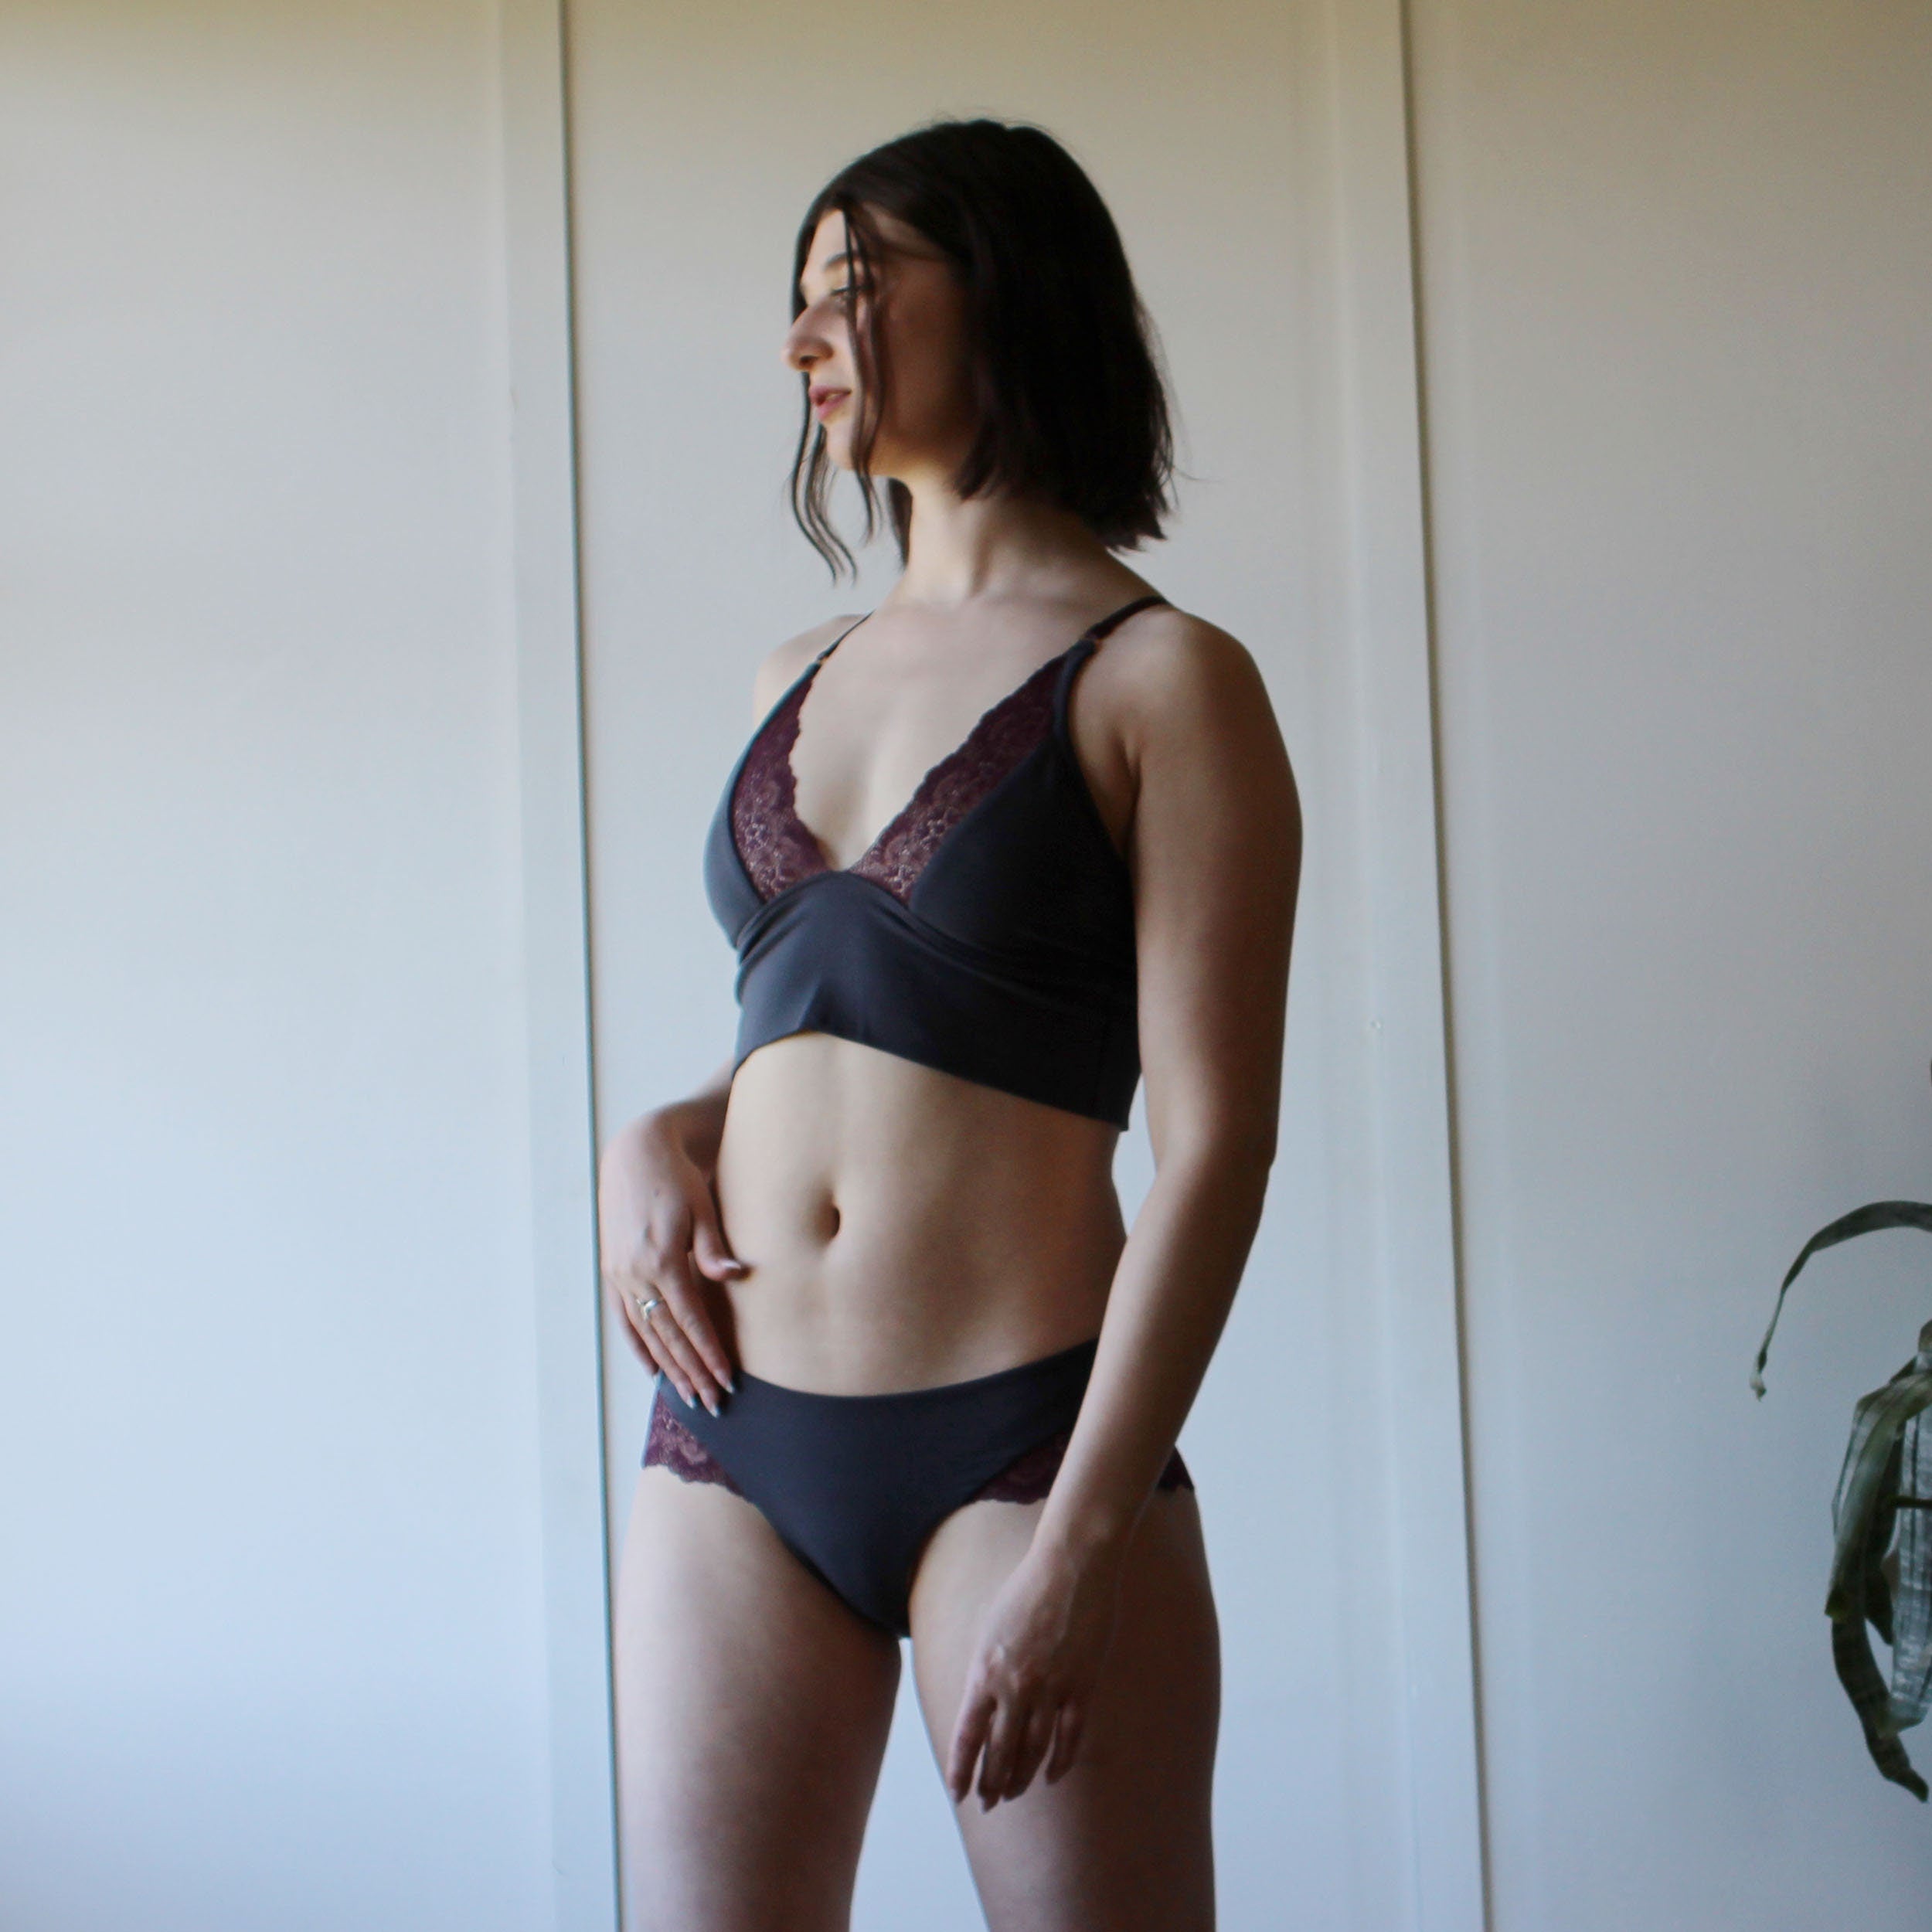 Organic Cotton Underwear Set, 2 Piece Set including Lace Trimmed Bralette and Panties, Made to Order, Made in the USA